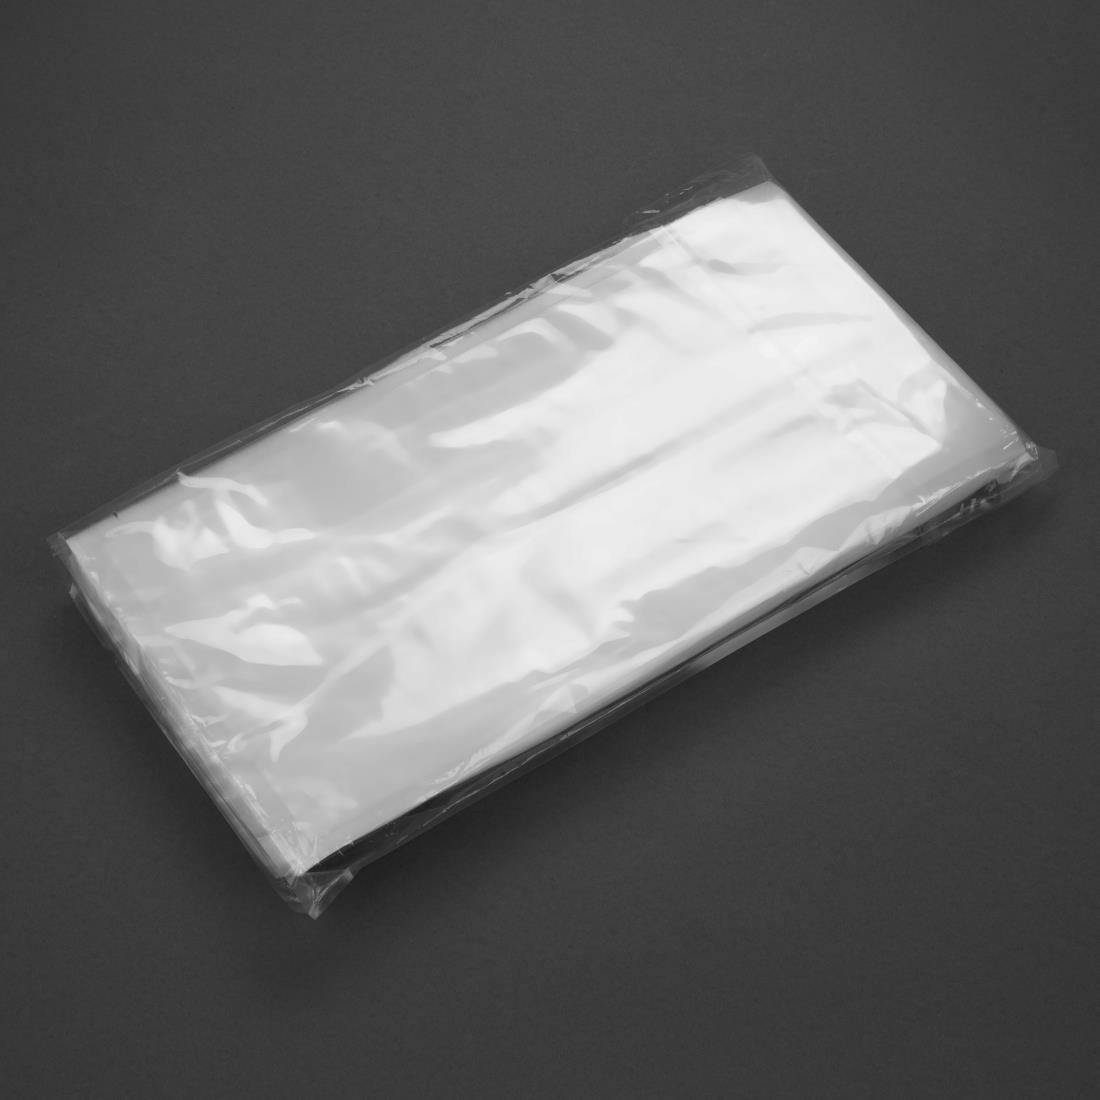 CU388 Vogue Chamber Vacuum Pack Bags 200x400mm (Pack of 100)